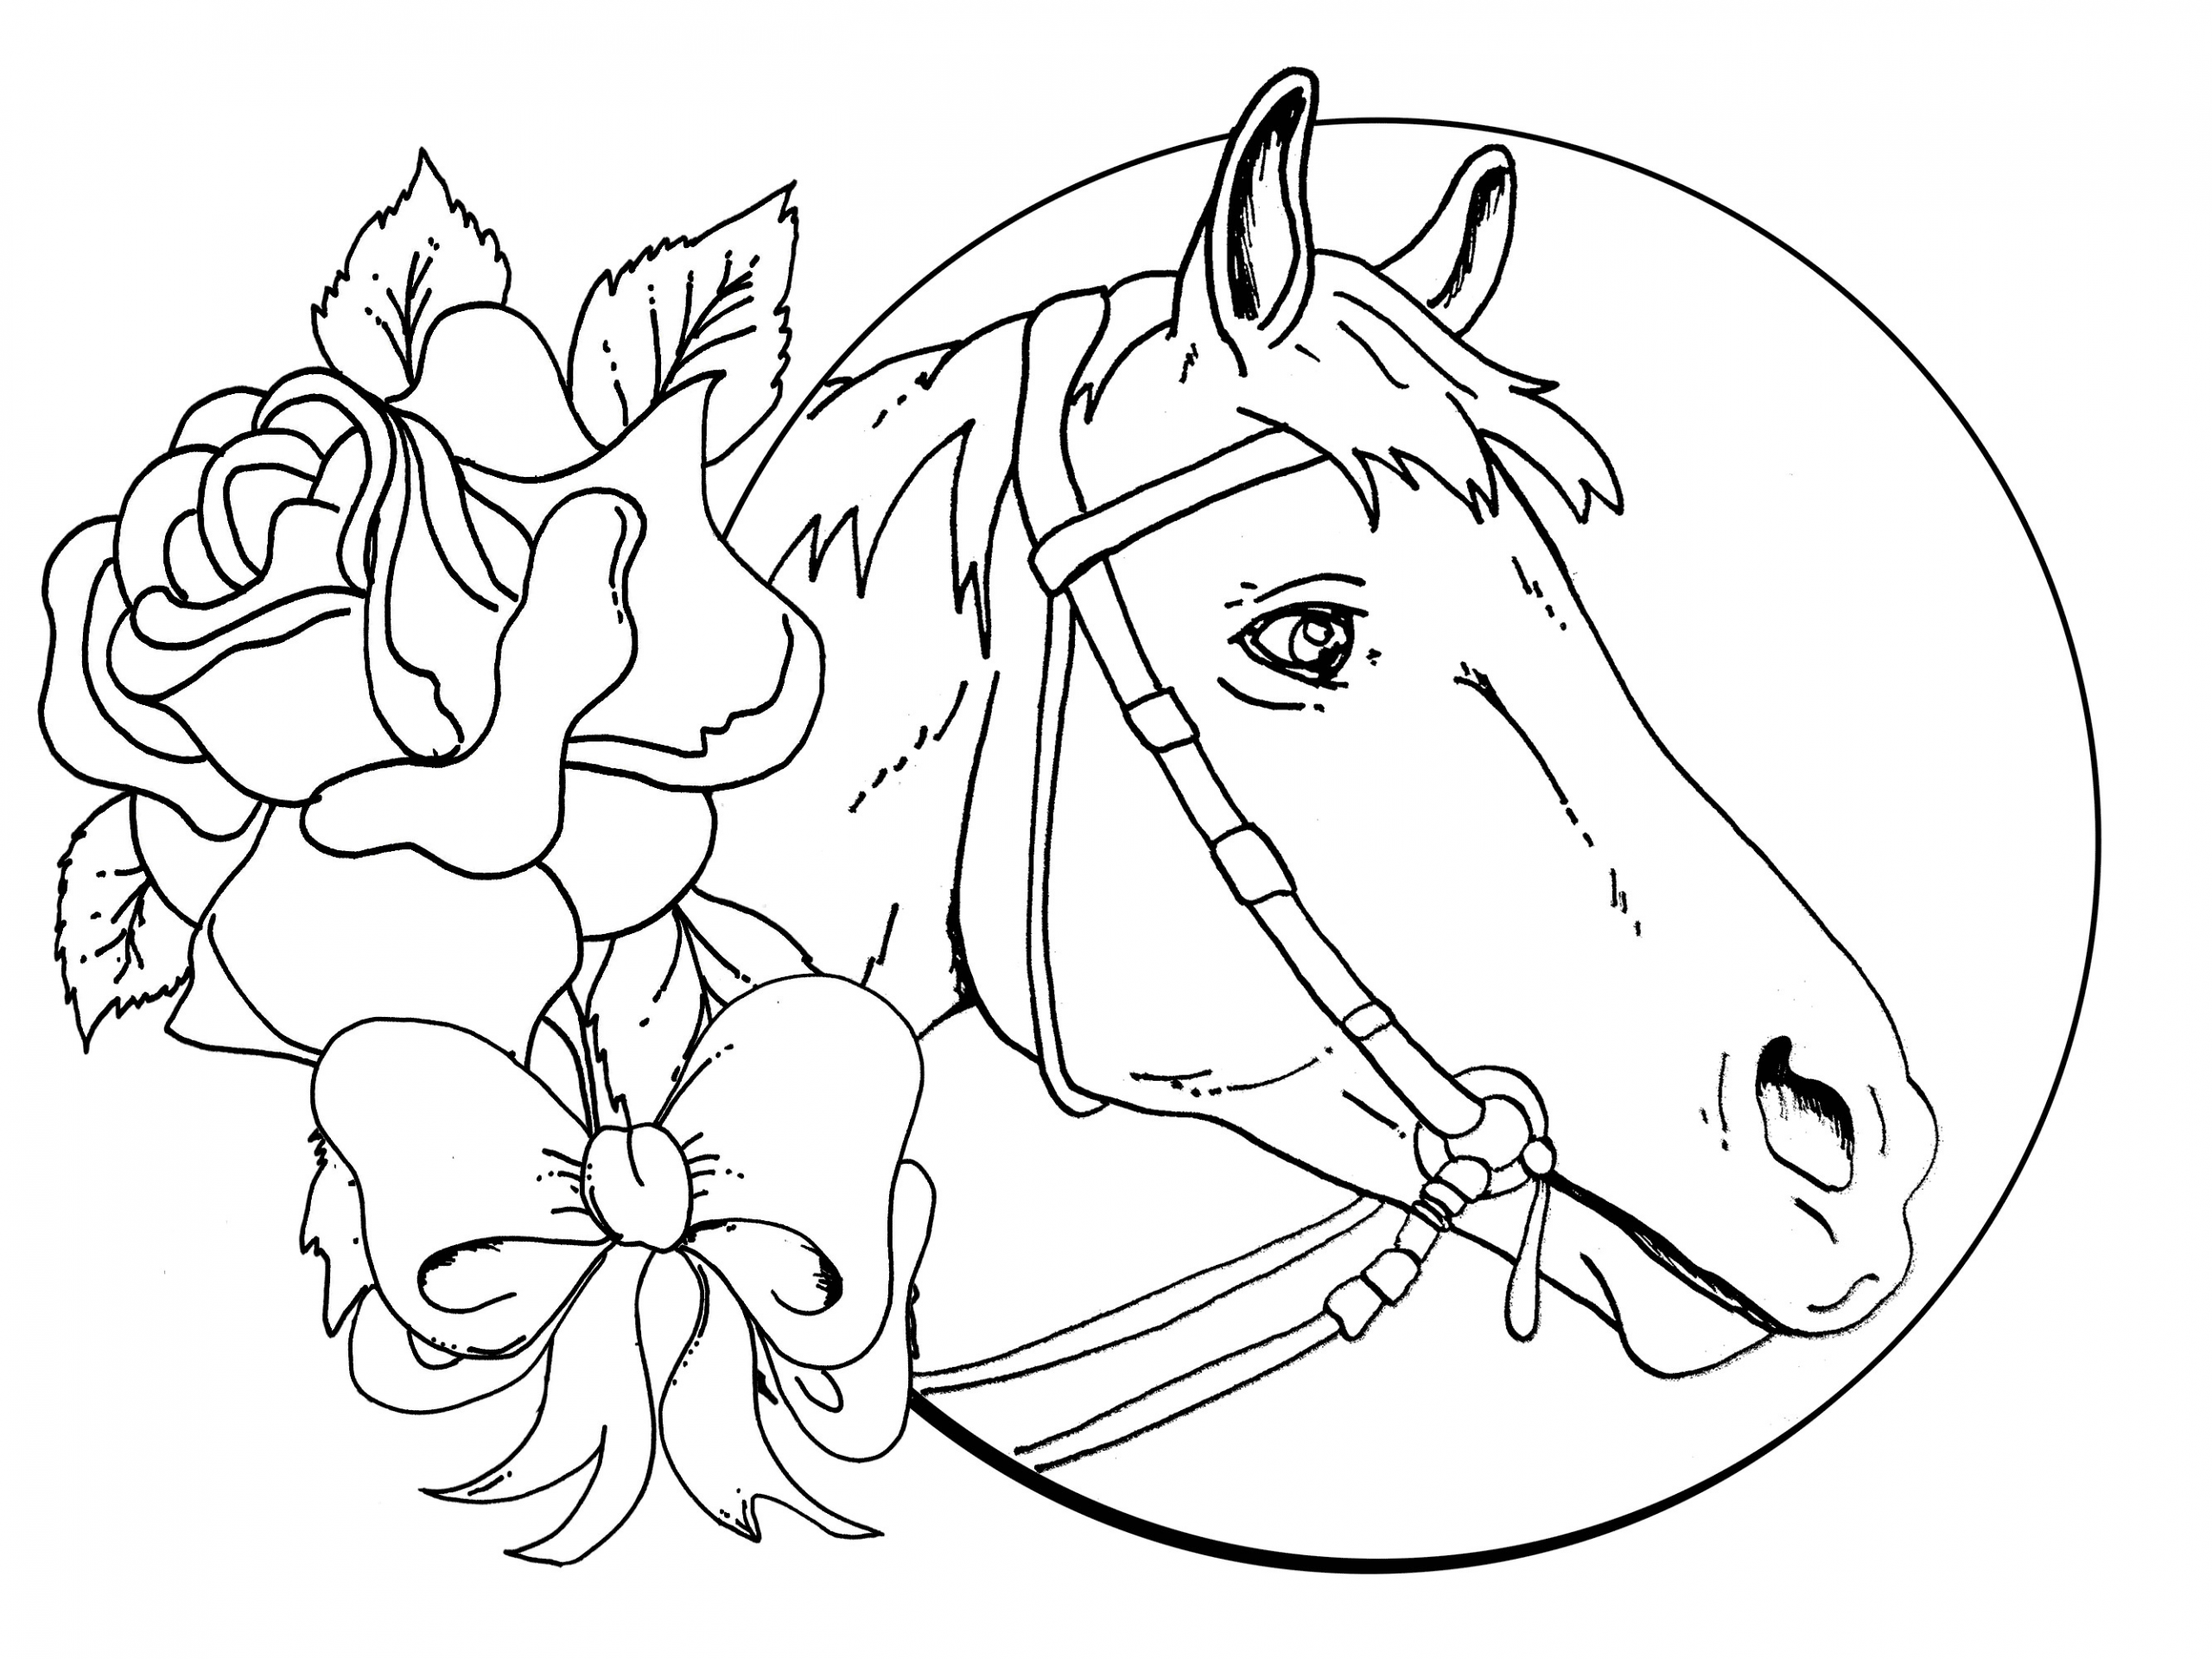 Detailed Coloring Pages For Teenage Girls
 Coloring Pages for Girls Dr Odd